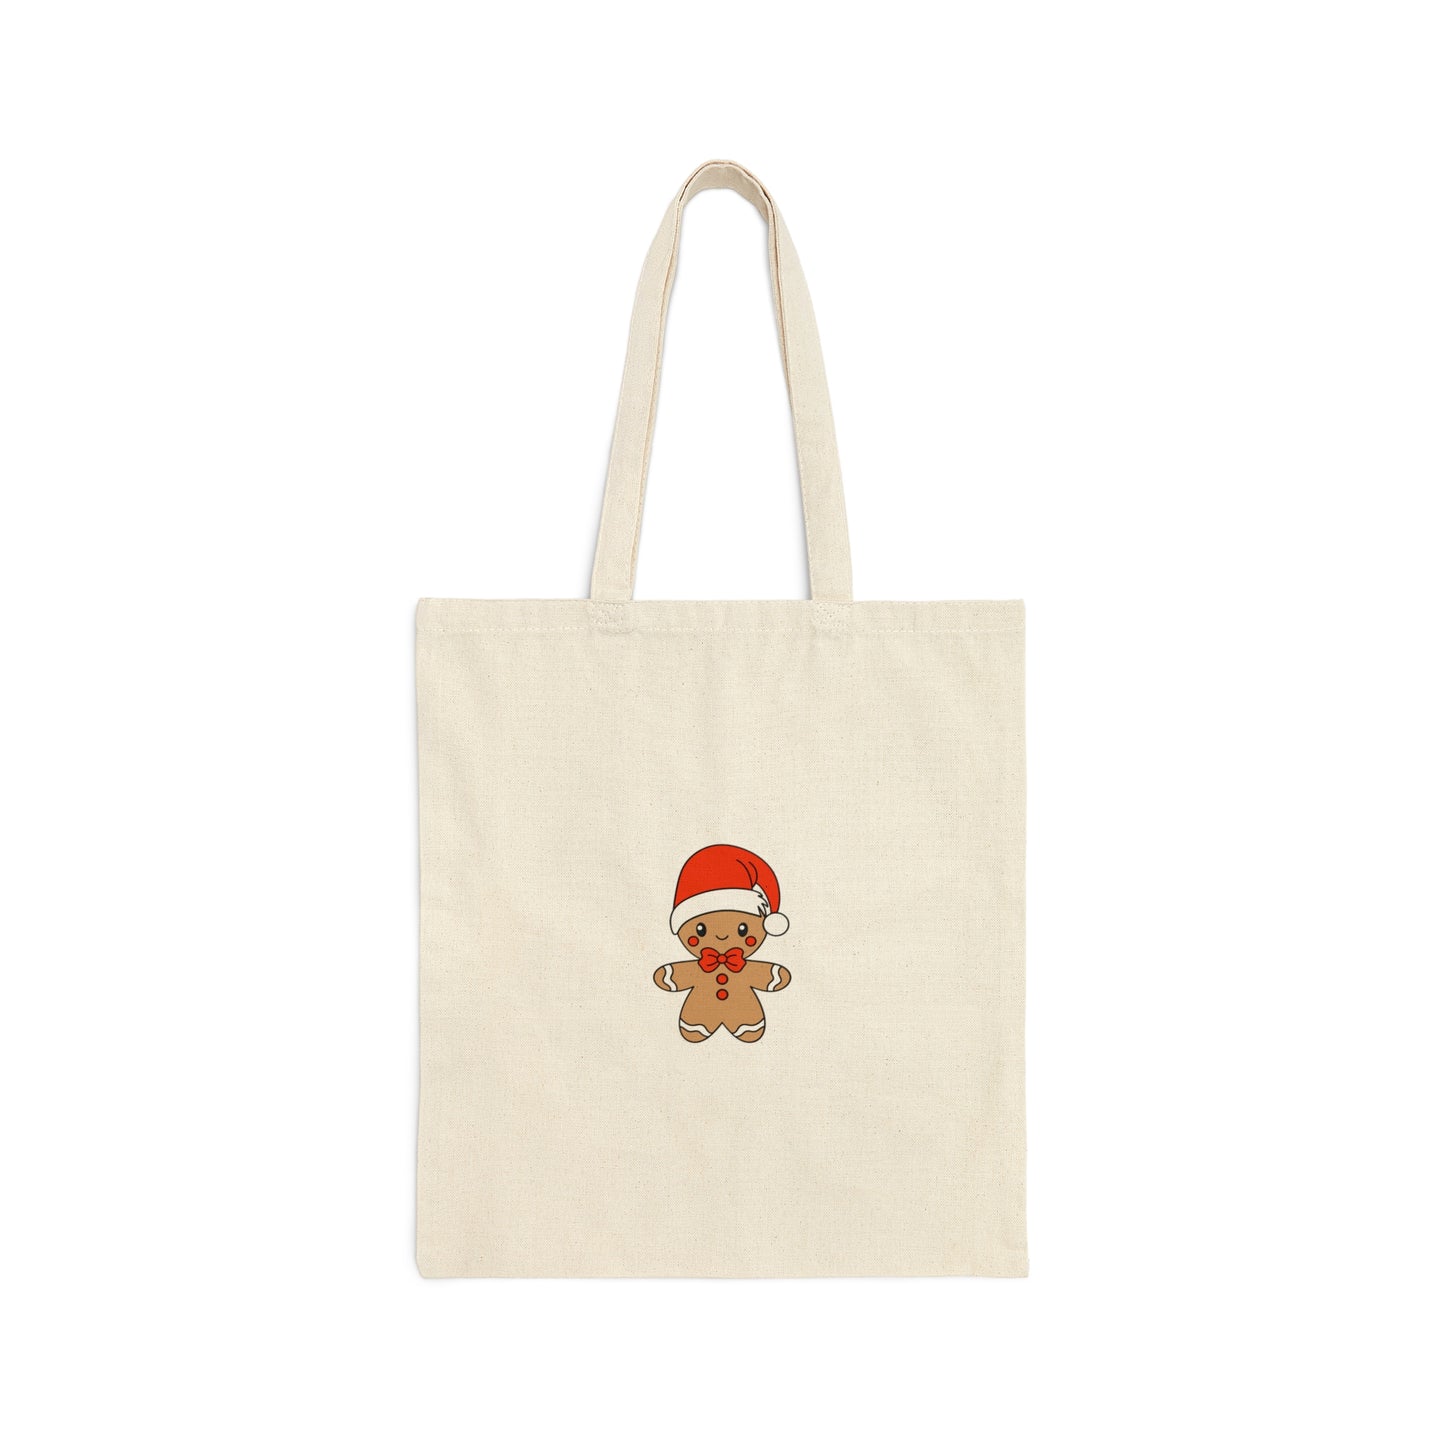 Cute Gingerbread - Christmas Tote Bag - Cotton Canvas Tote Bag